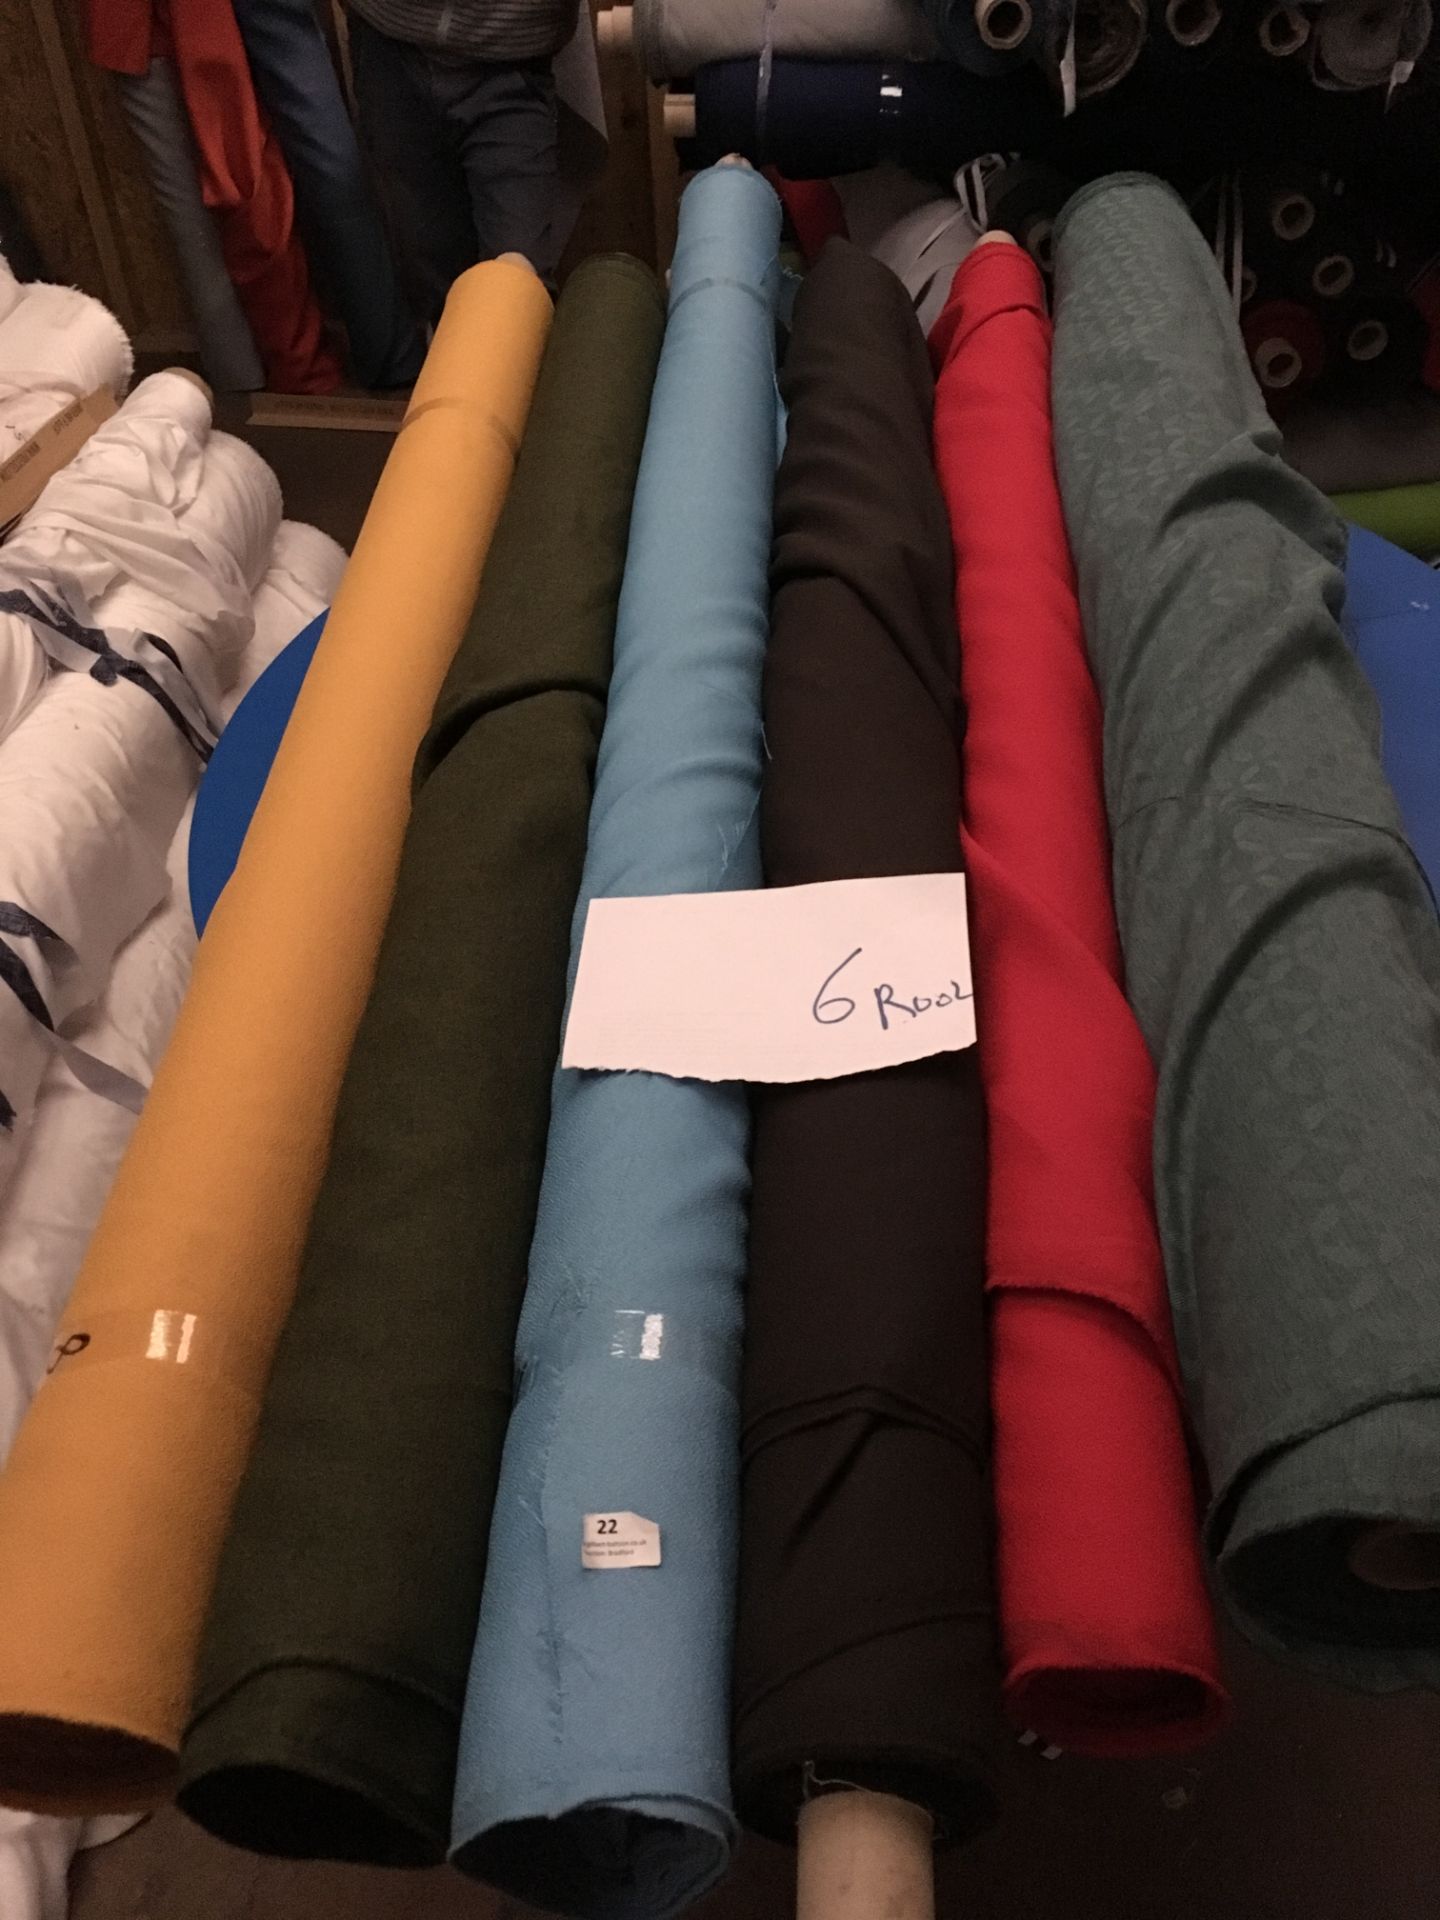 Four Rolls of Polyester Crepe Fabric Assorted Colours and Lengths